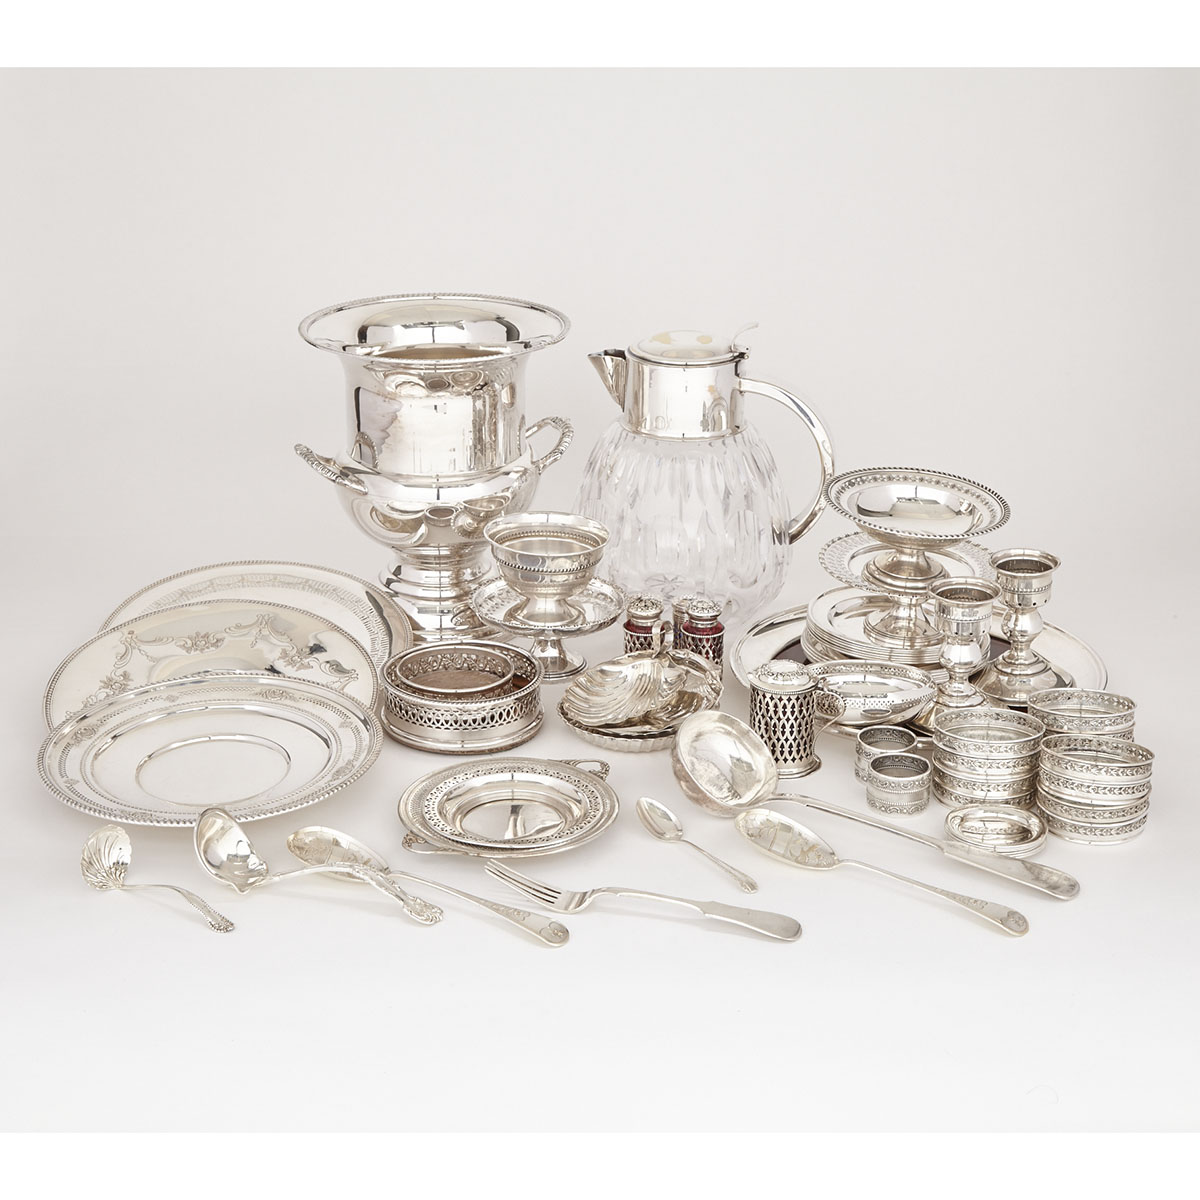 Grouped Lot of North American and Russian Silver, 20th century